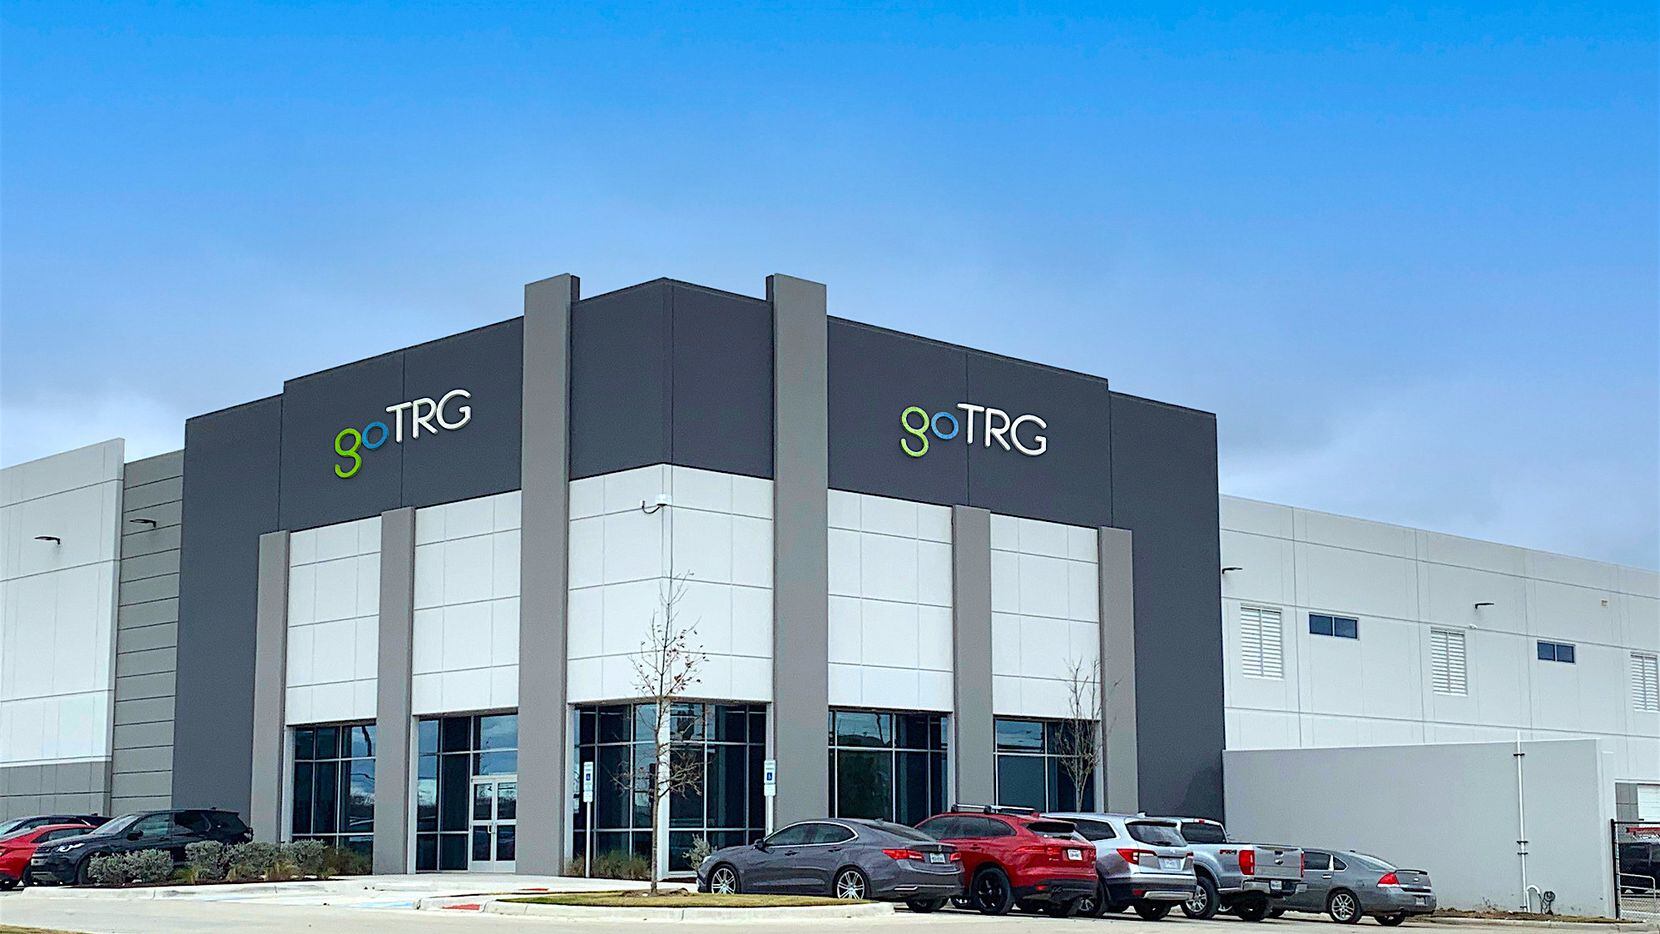 A Florida-based logistics firm is opening a North Texas operation that will hire 200 workers. The Fort Worth location on Oak Grove Road will occupy 250,000 square feet of space for what GoTRG calls its reverse logistics business.